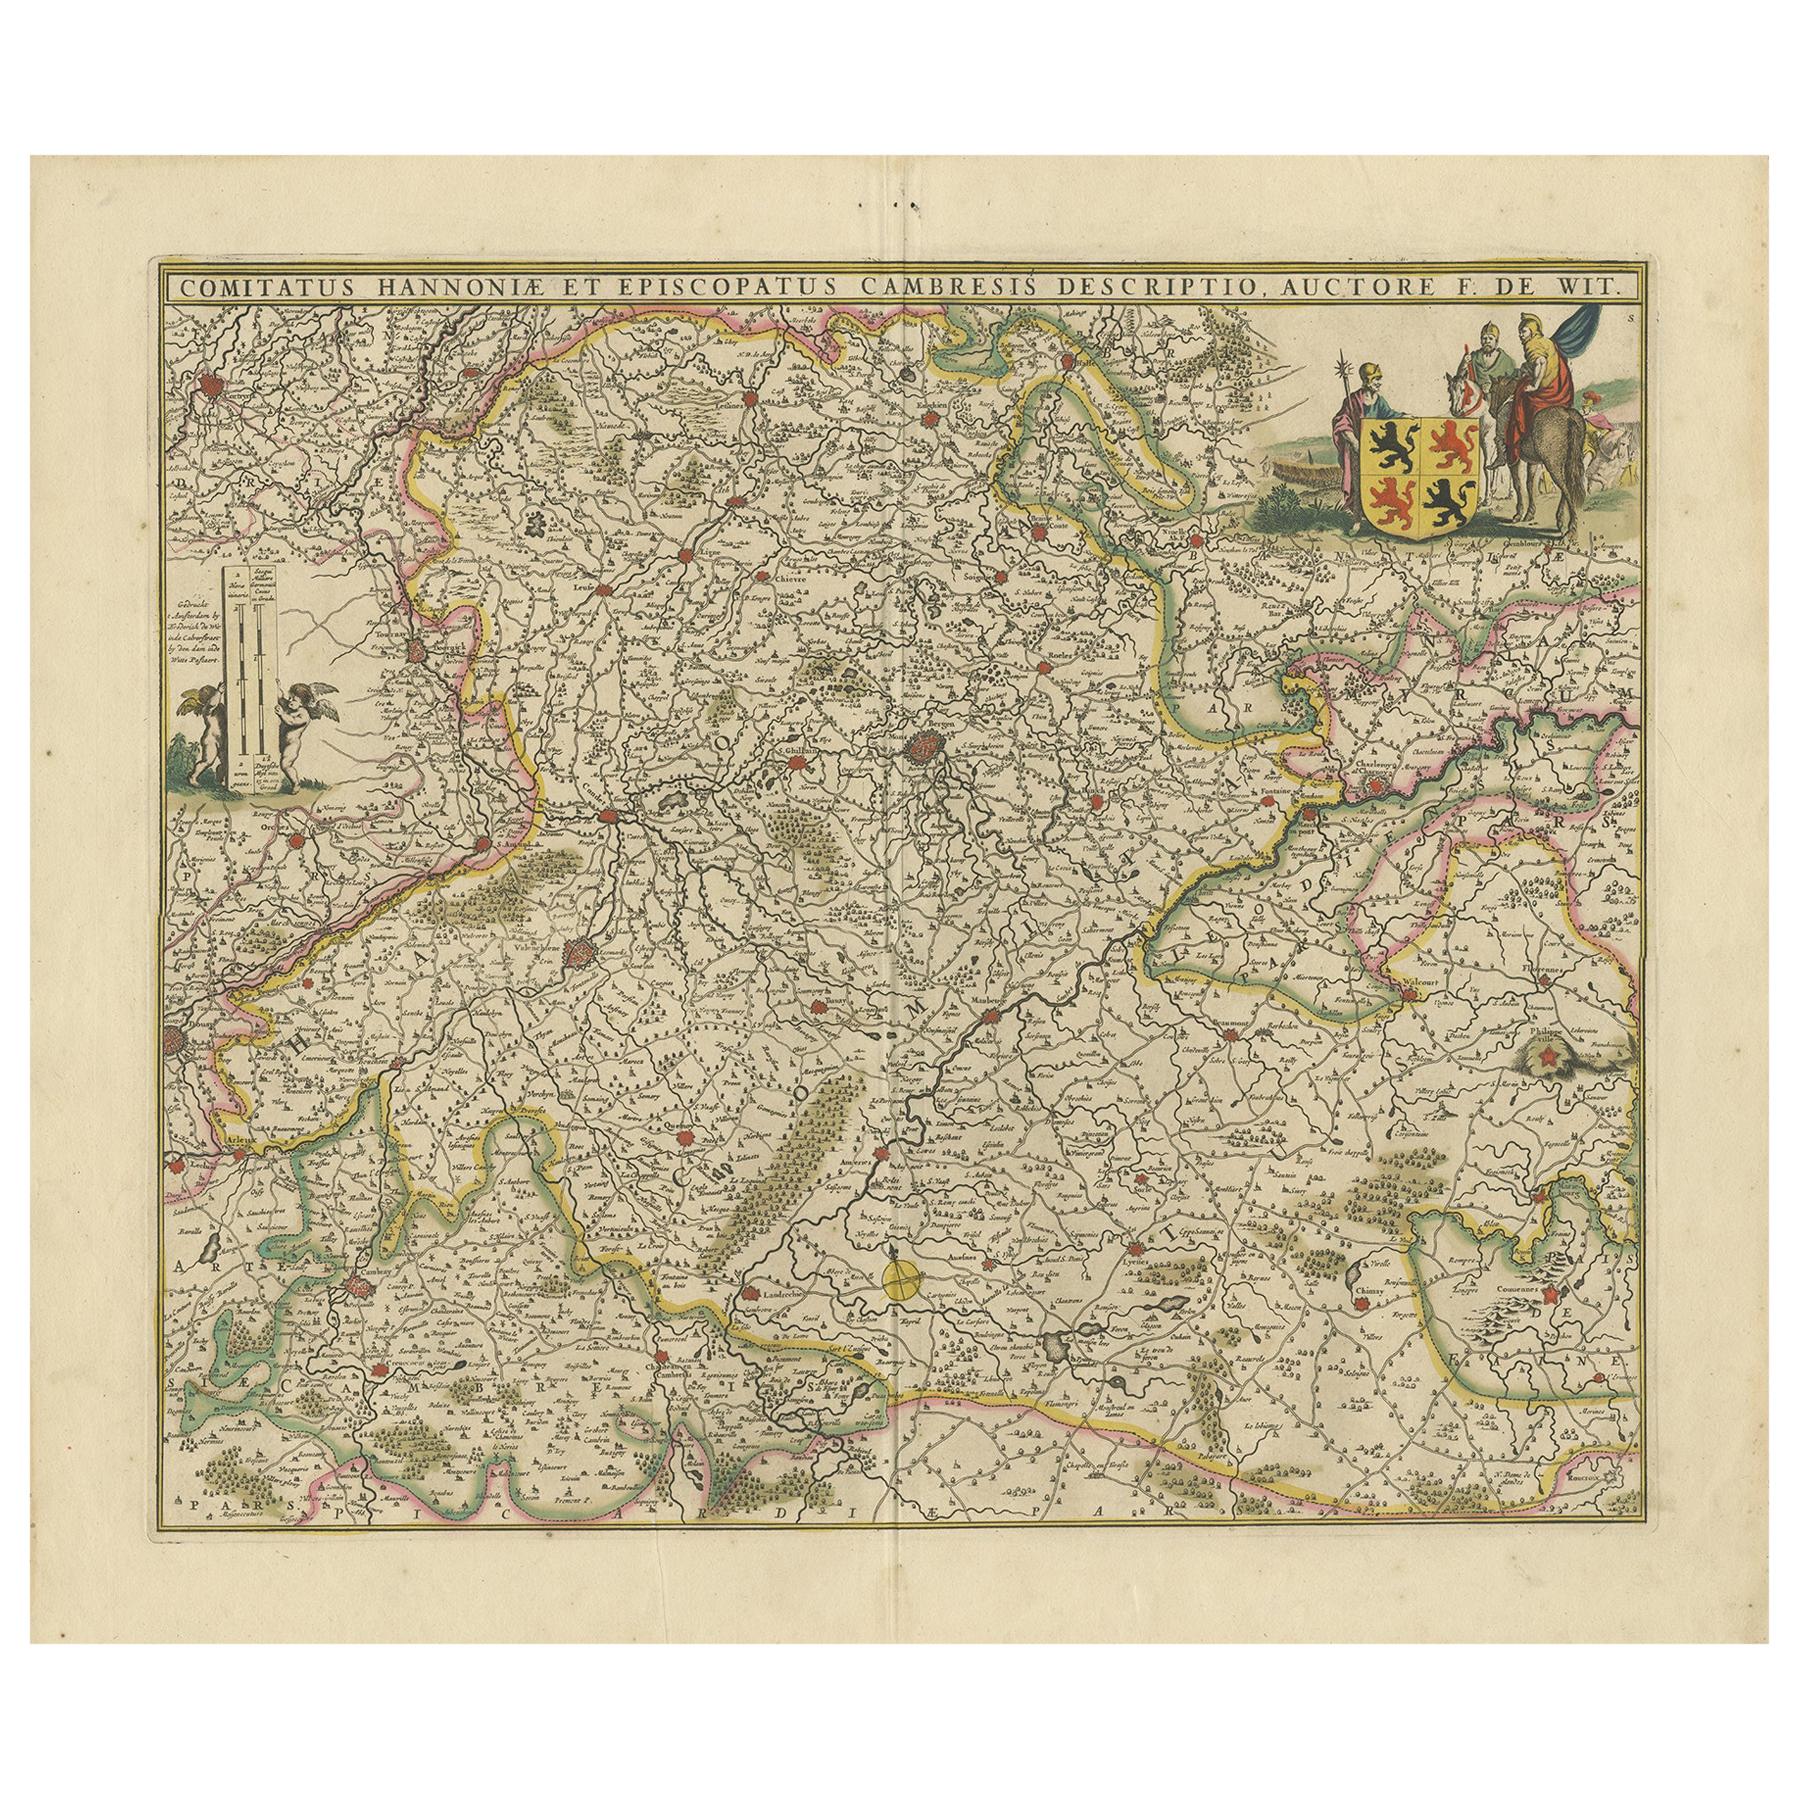 Antique Map of the Hainaut Region 'France' by F. de Wit, circa 1680 For Sale